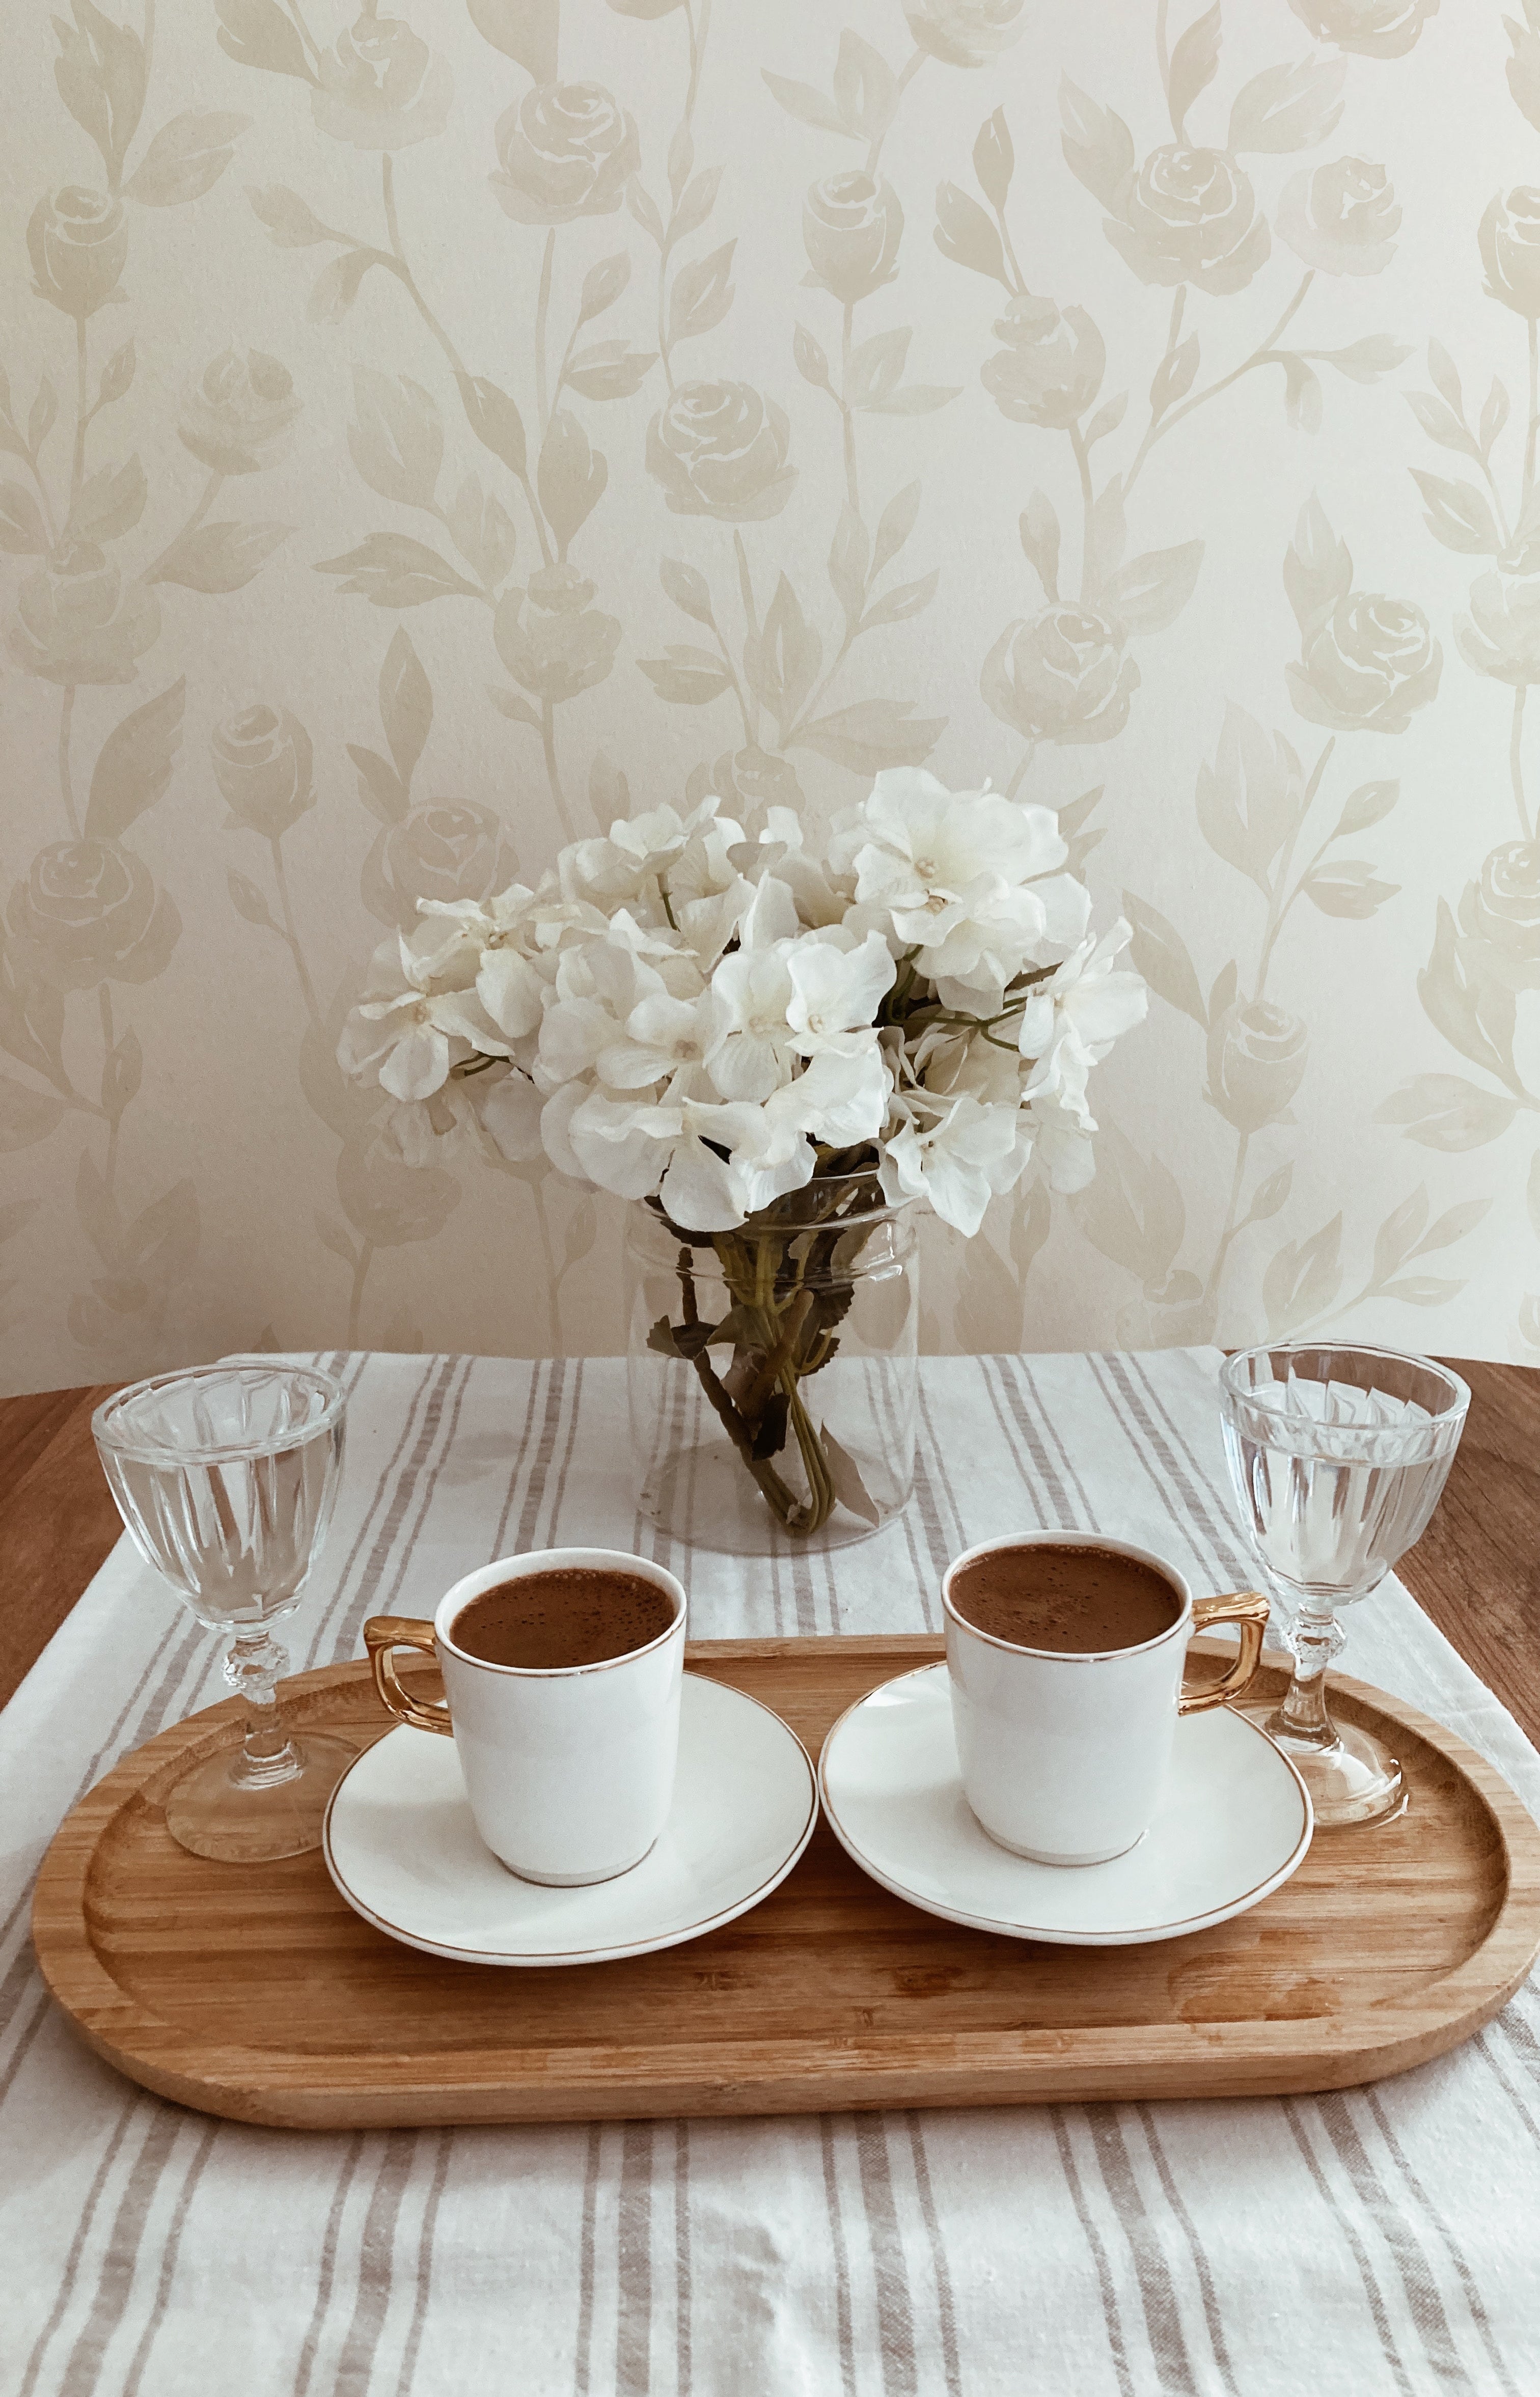 A simple yet stylish home coffee setup with the Cream Watercolour Rose Wallpaper in the background. The scene includes a wooden tray on a striped tablecloth holding two cups of coffee and a vase with white flowers, creating a serene morning atmosphere.